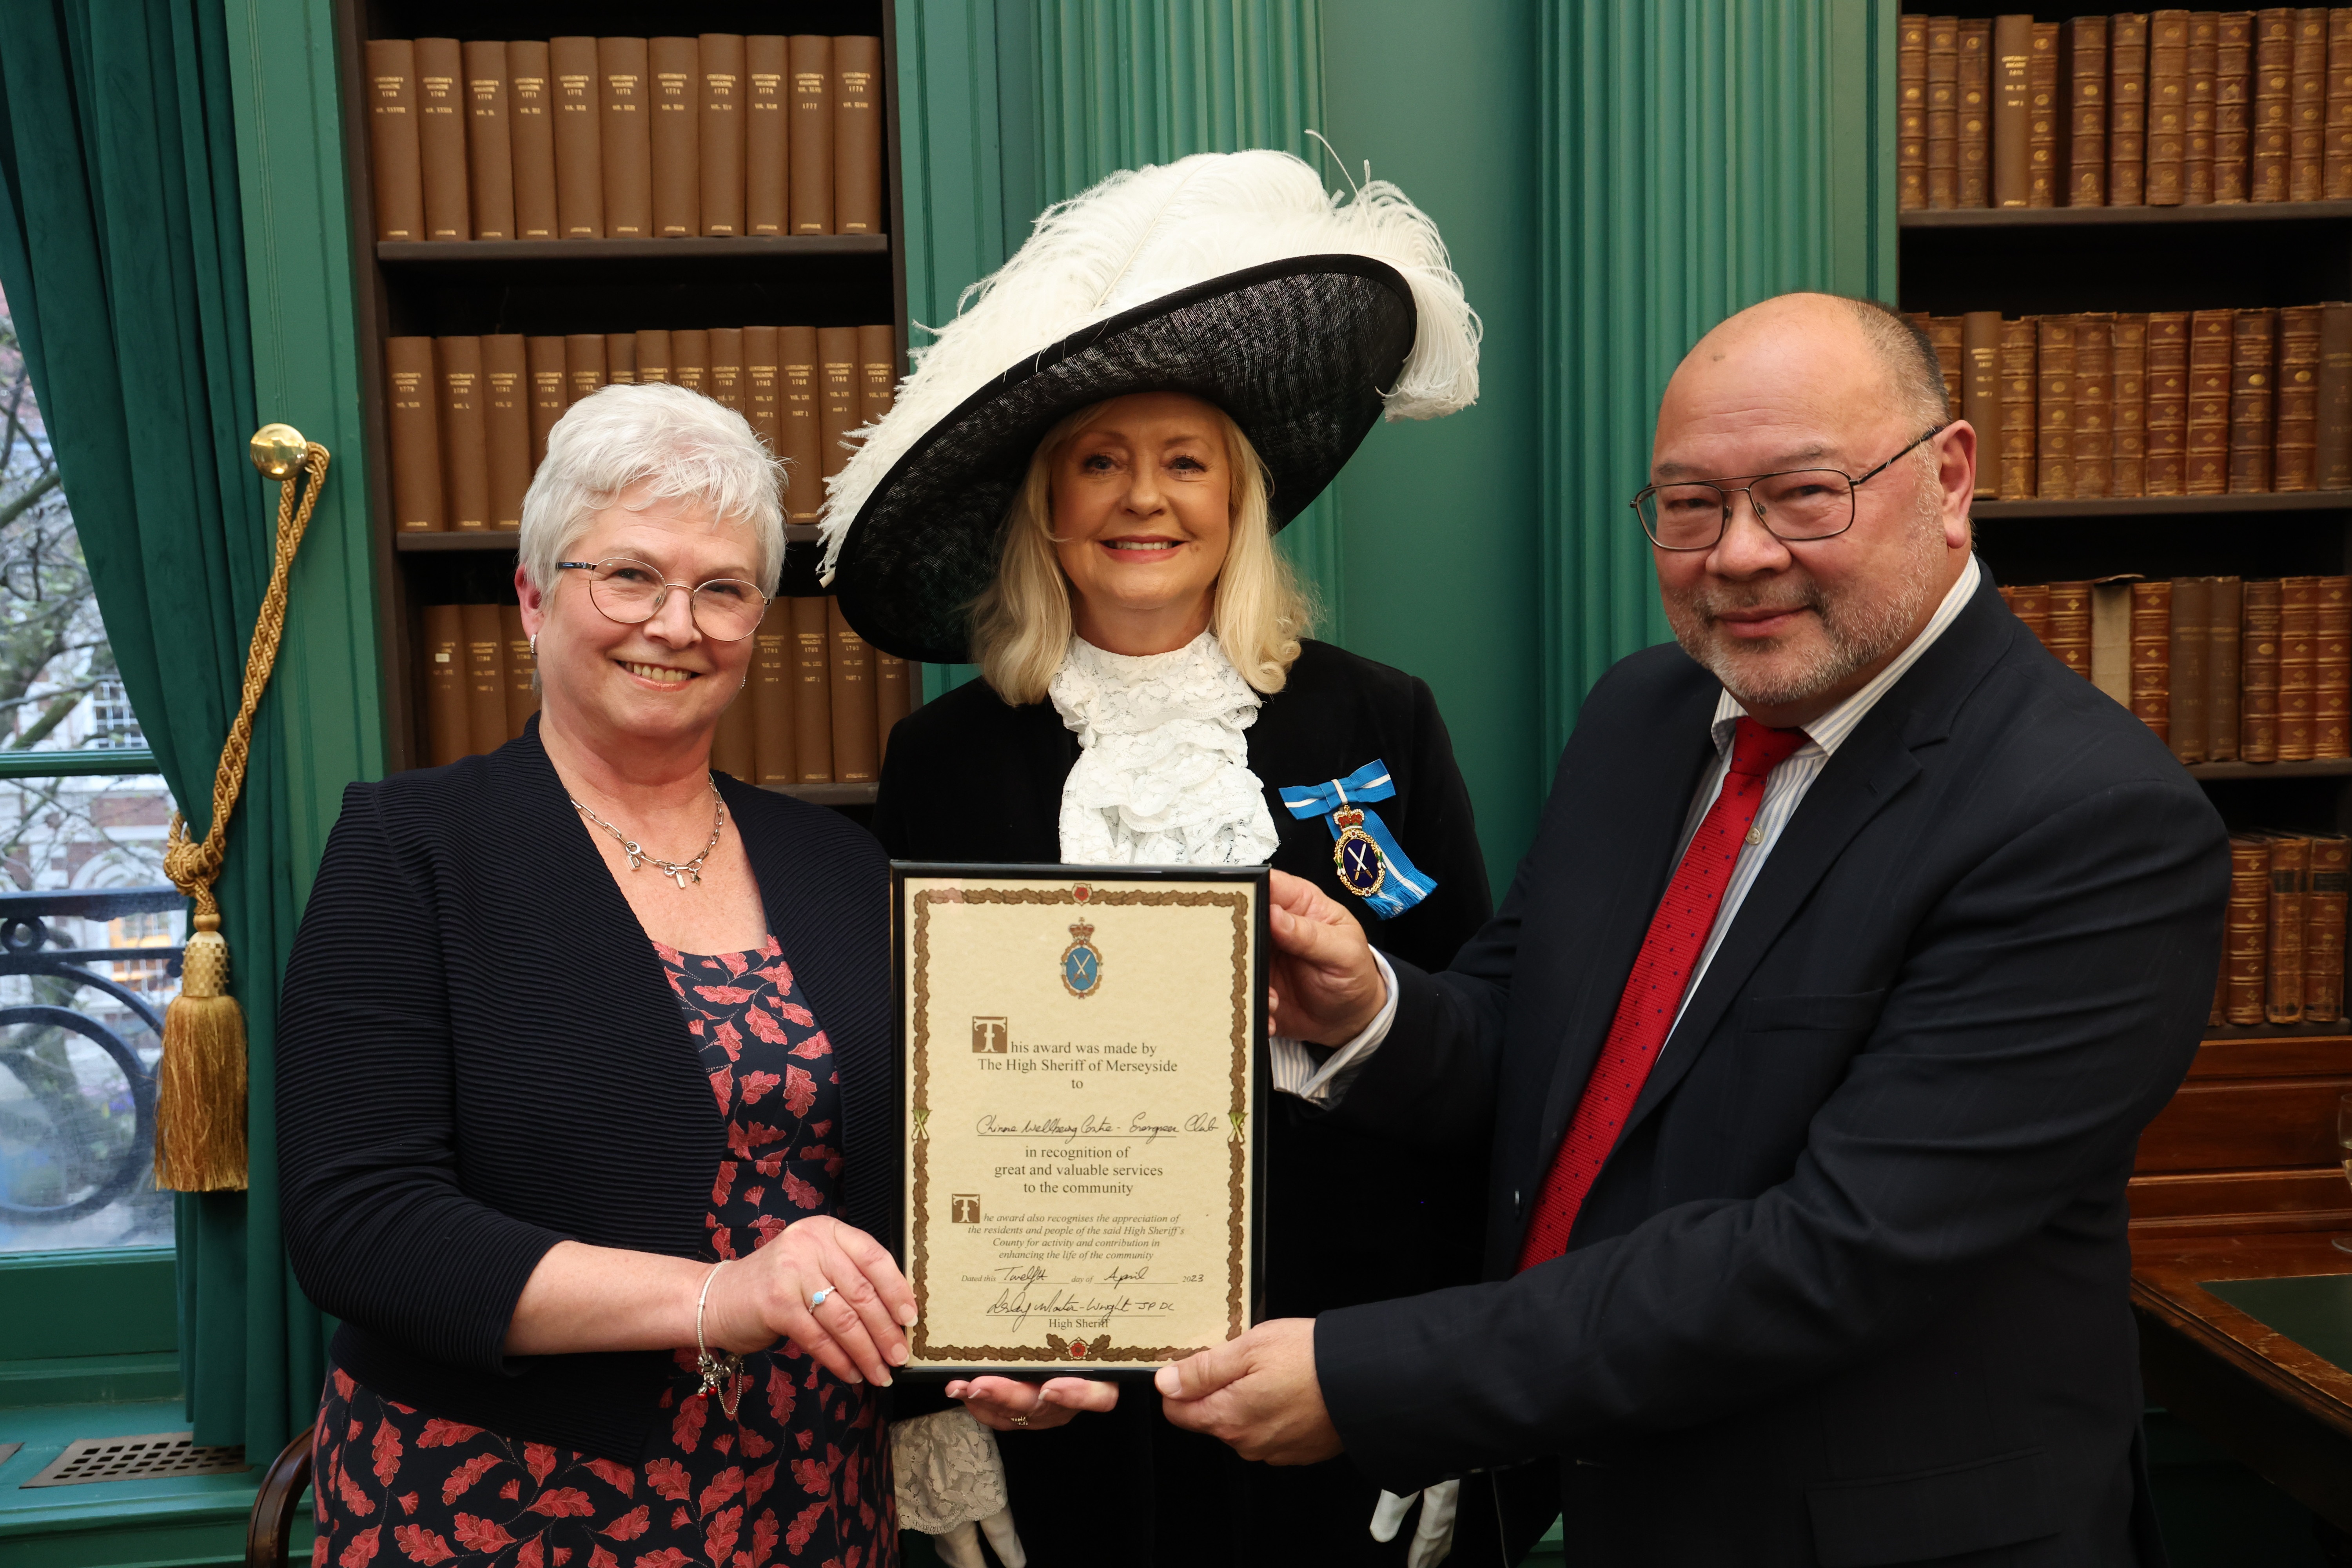 Chinese Wellbeing Receives High Sheriff of Merseyside Award